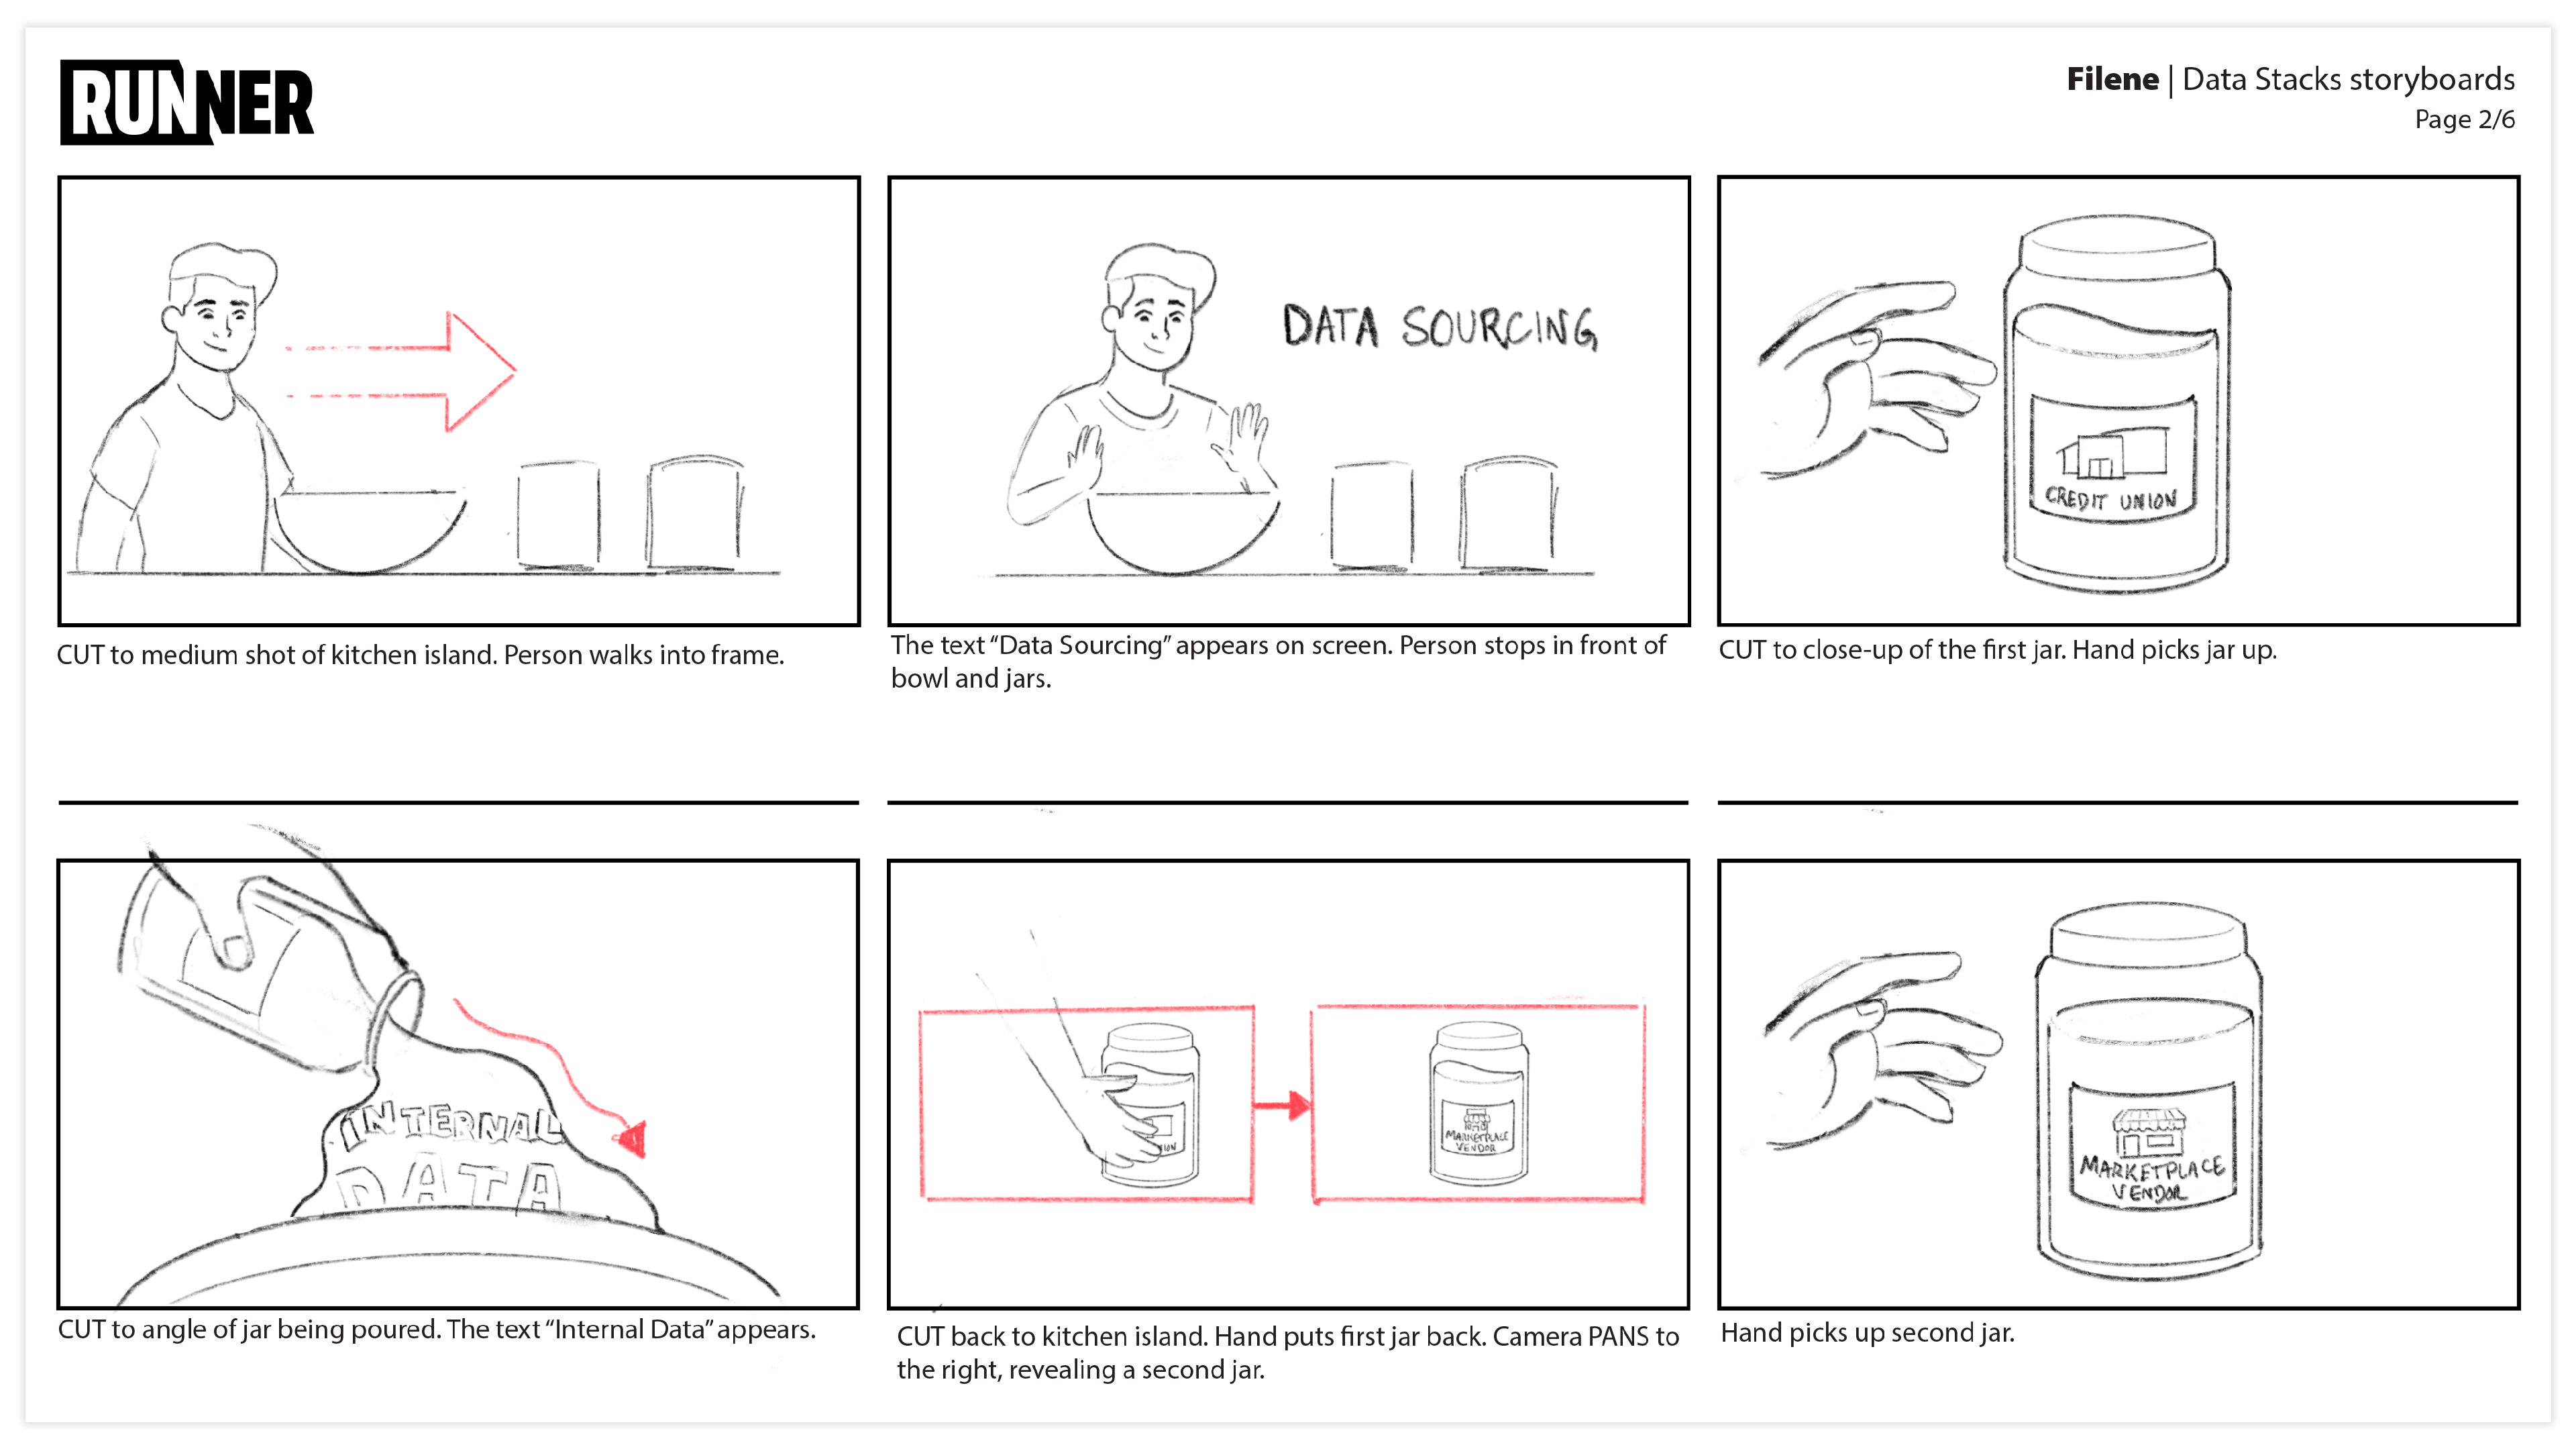 Selection of six frames from a storyboard document labeled "Filene Data Stacks Storyboards Page 2/6" depicting a character mixing ingredients.